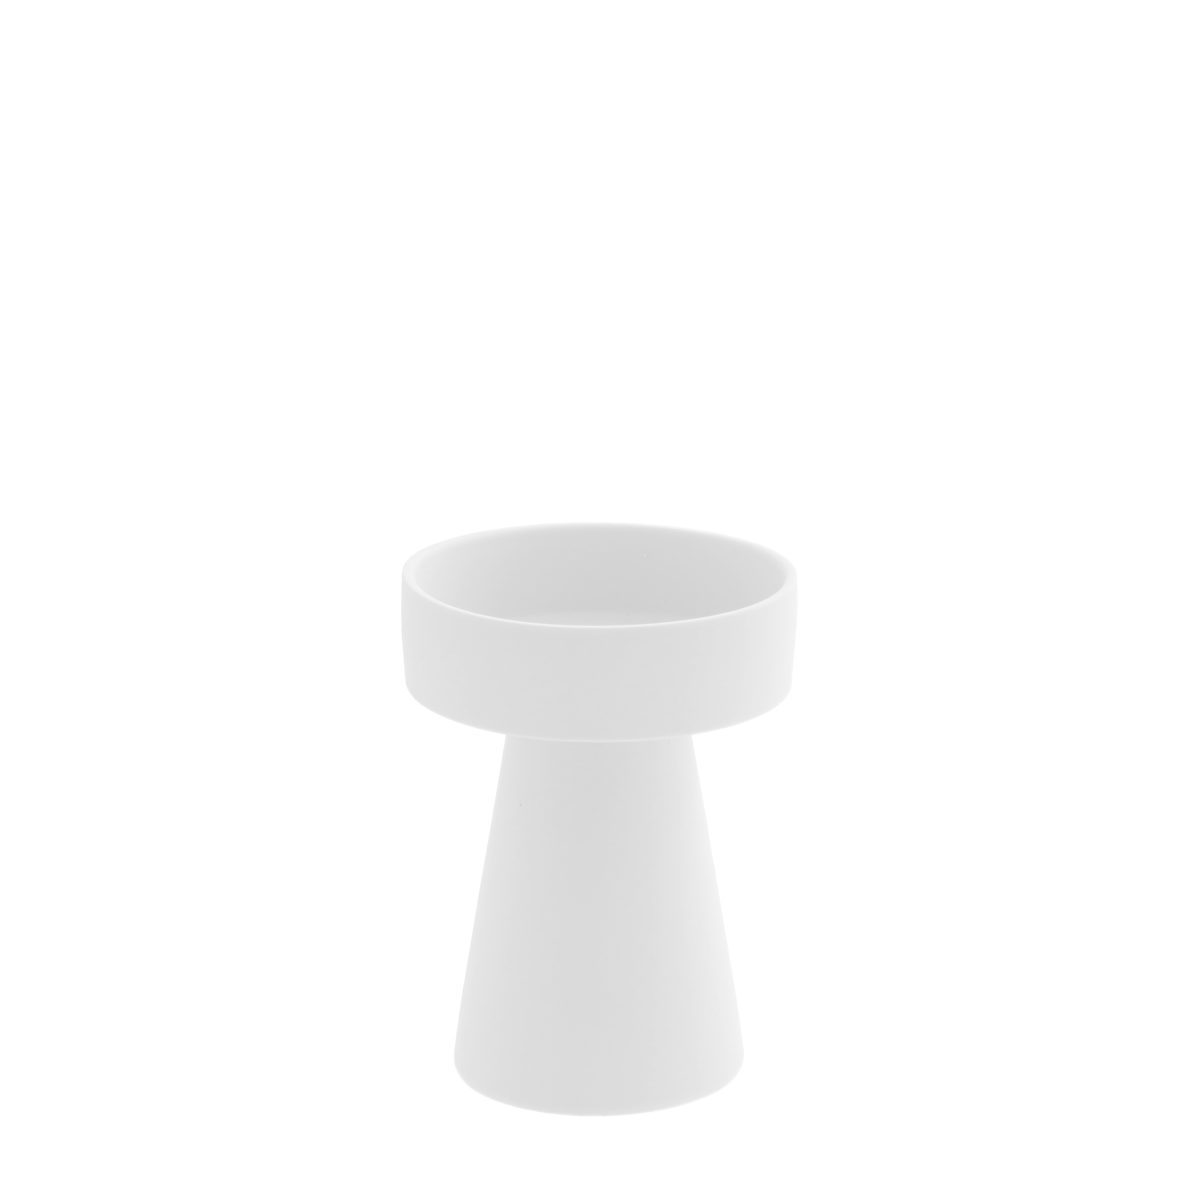 Storefactory Small White Candle Holder   